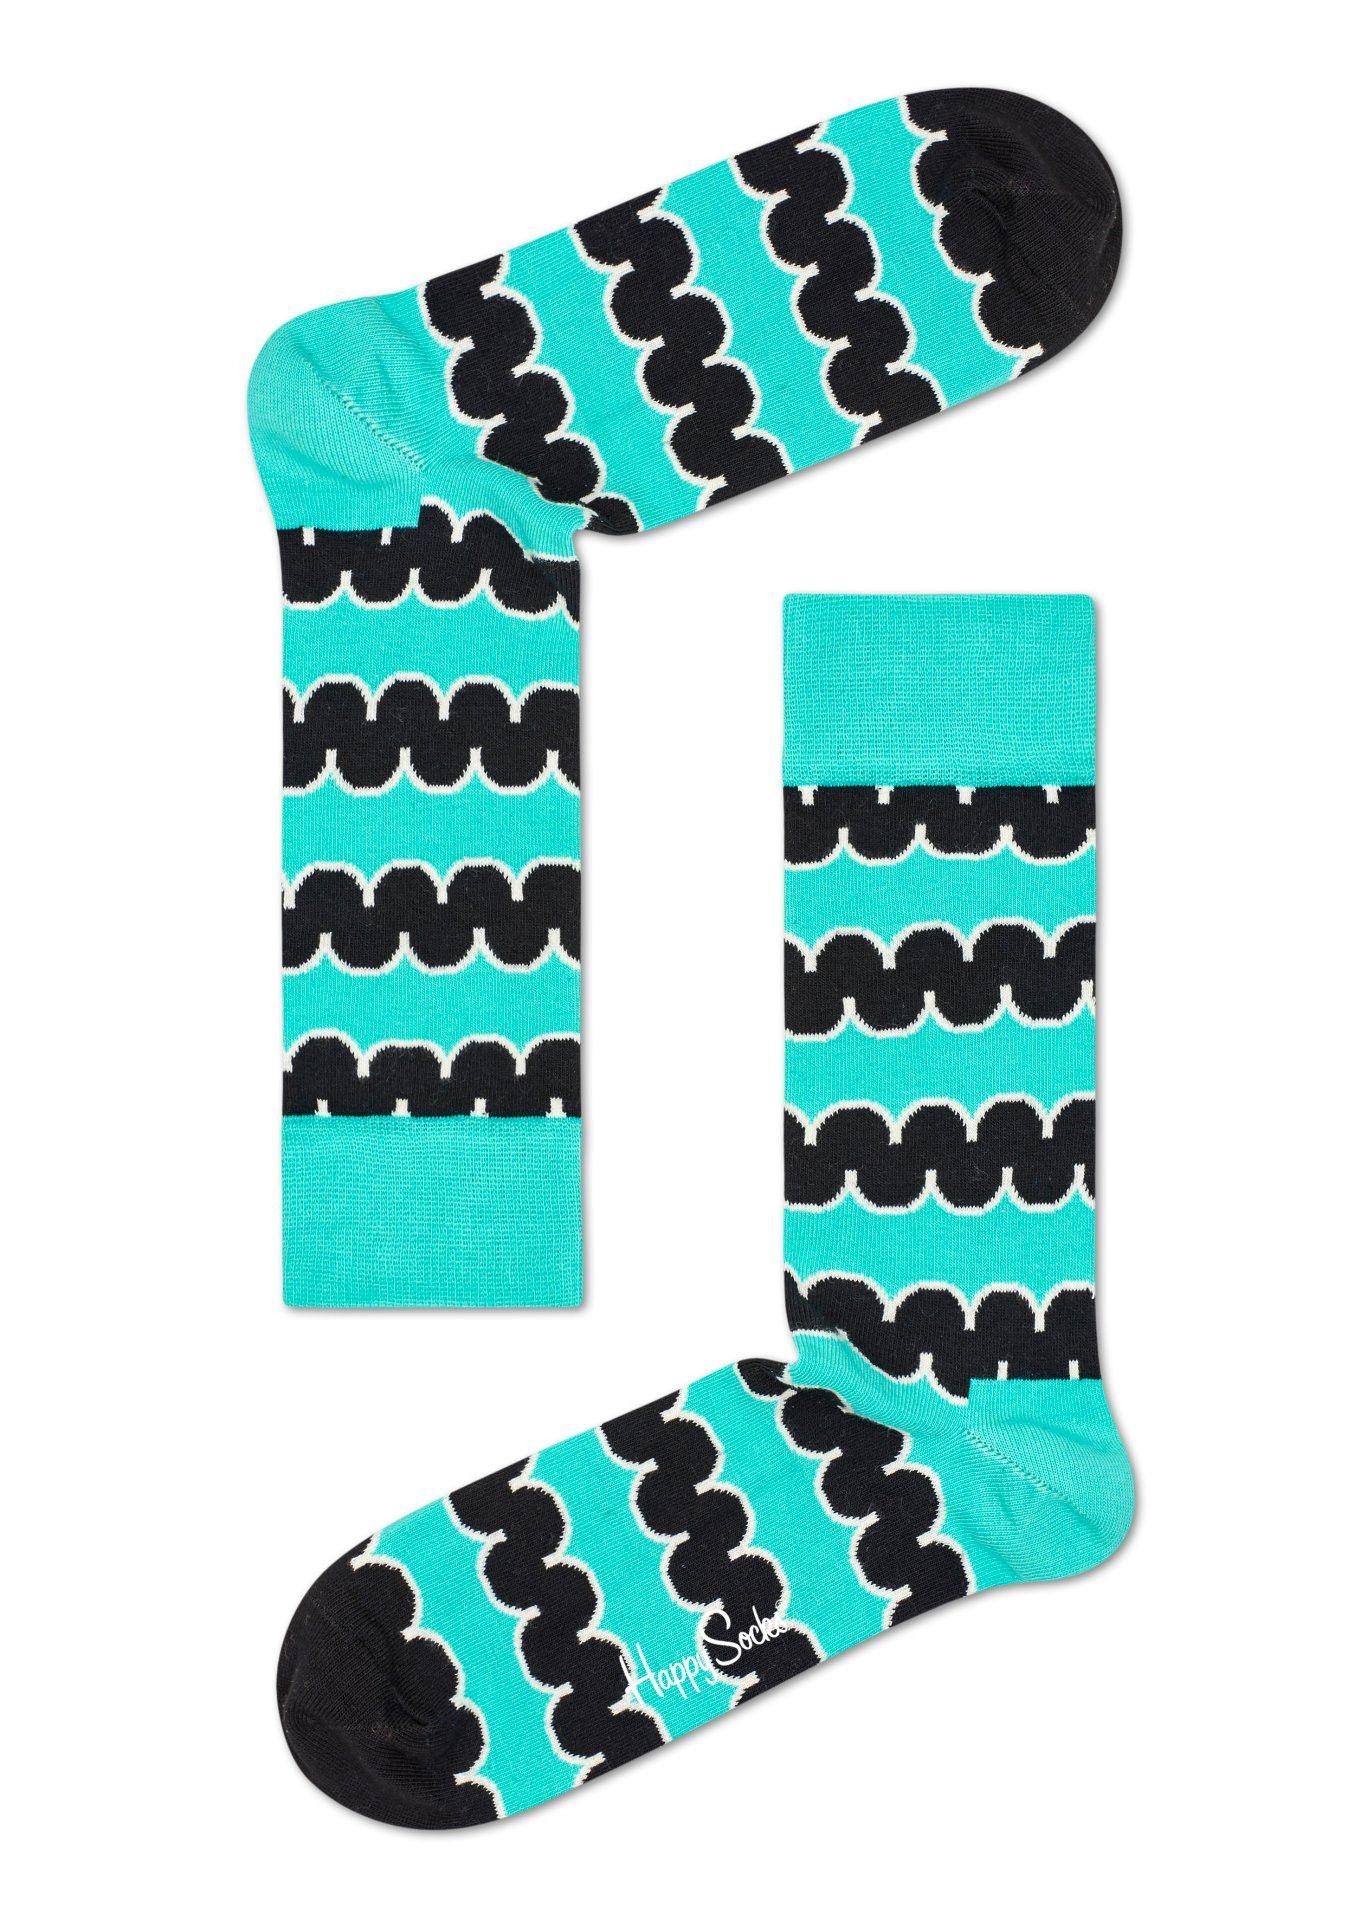 Squiggly Green M Logo - Buy Squiggly Happy Socks Green